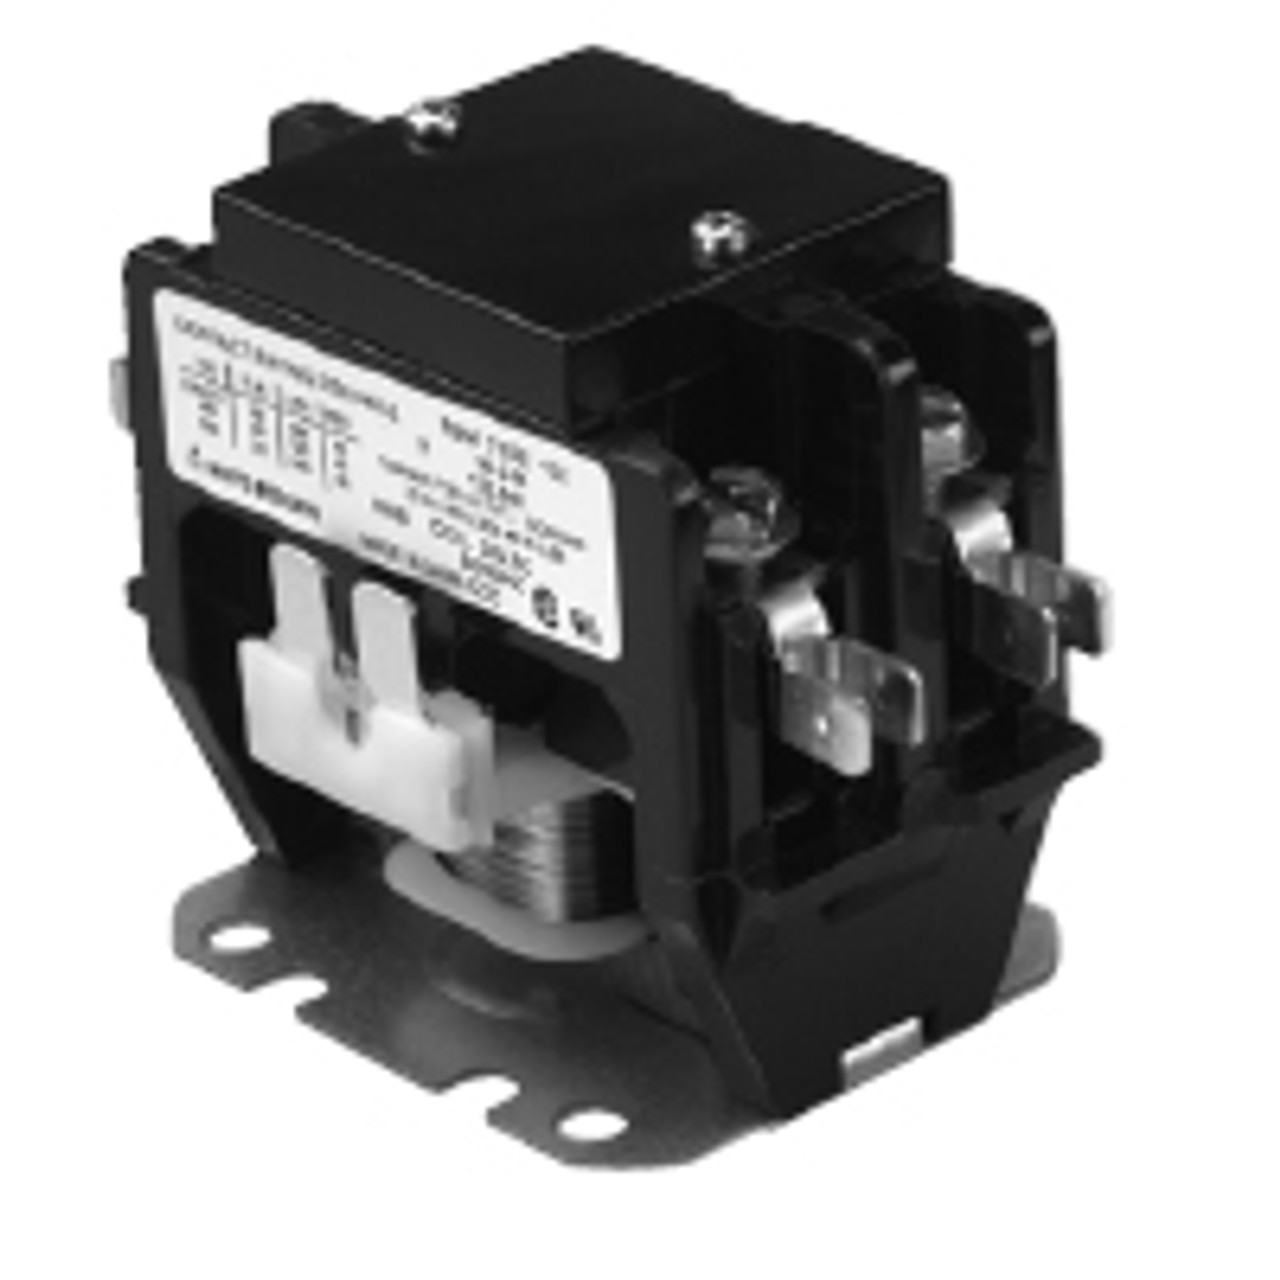 Stancor / White Rodgers 122-902 Power Contactors